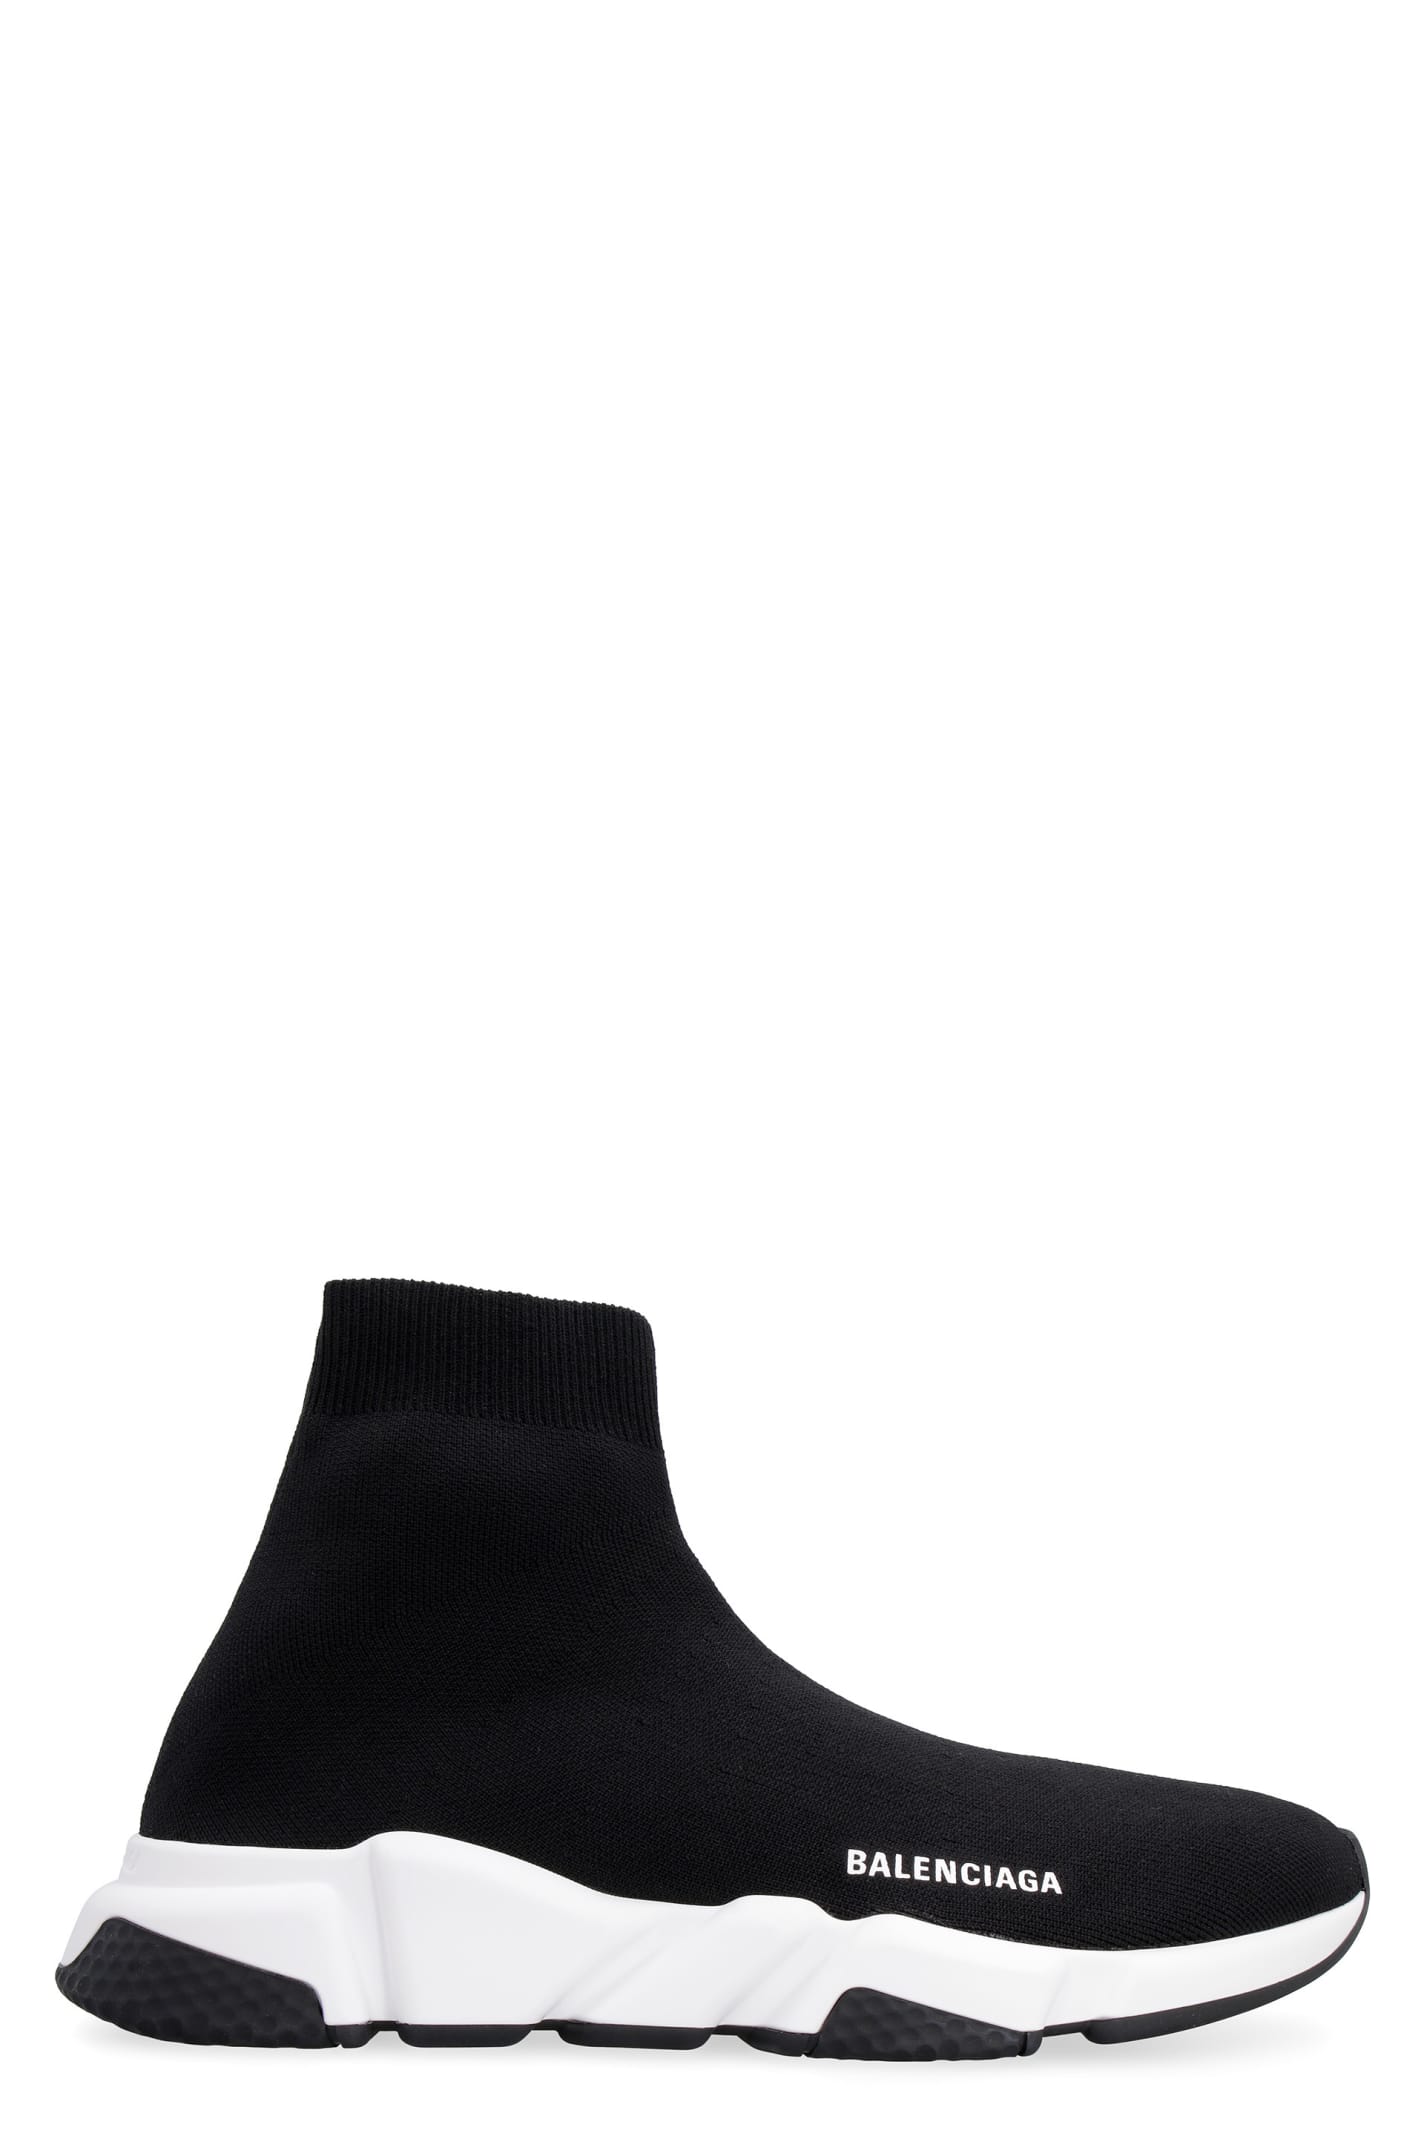 Balenciaga Speed Knitted Sock-style Sneakers